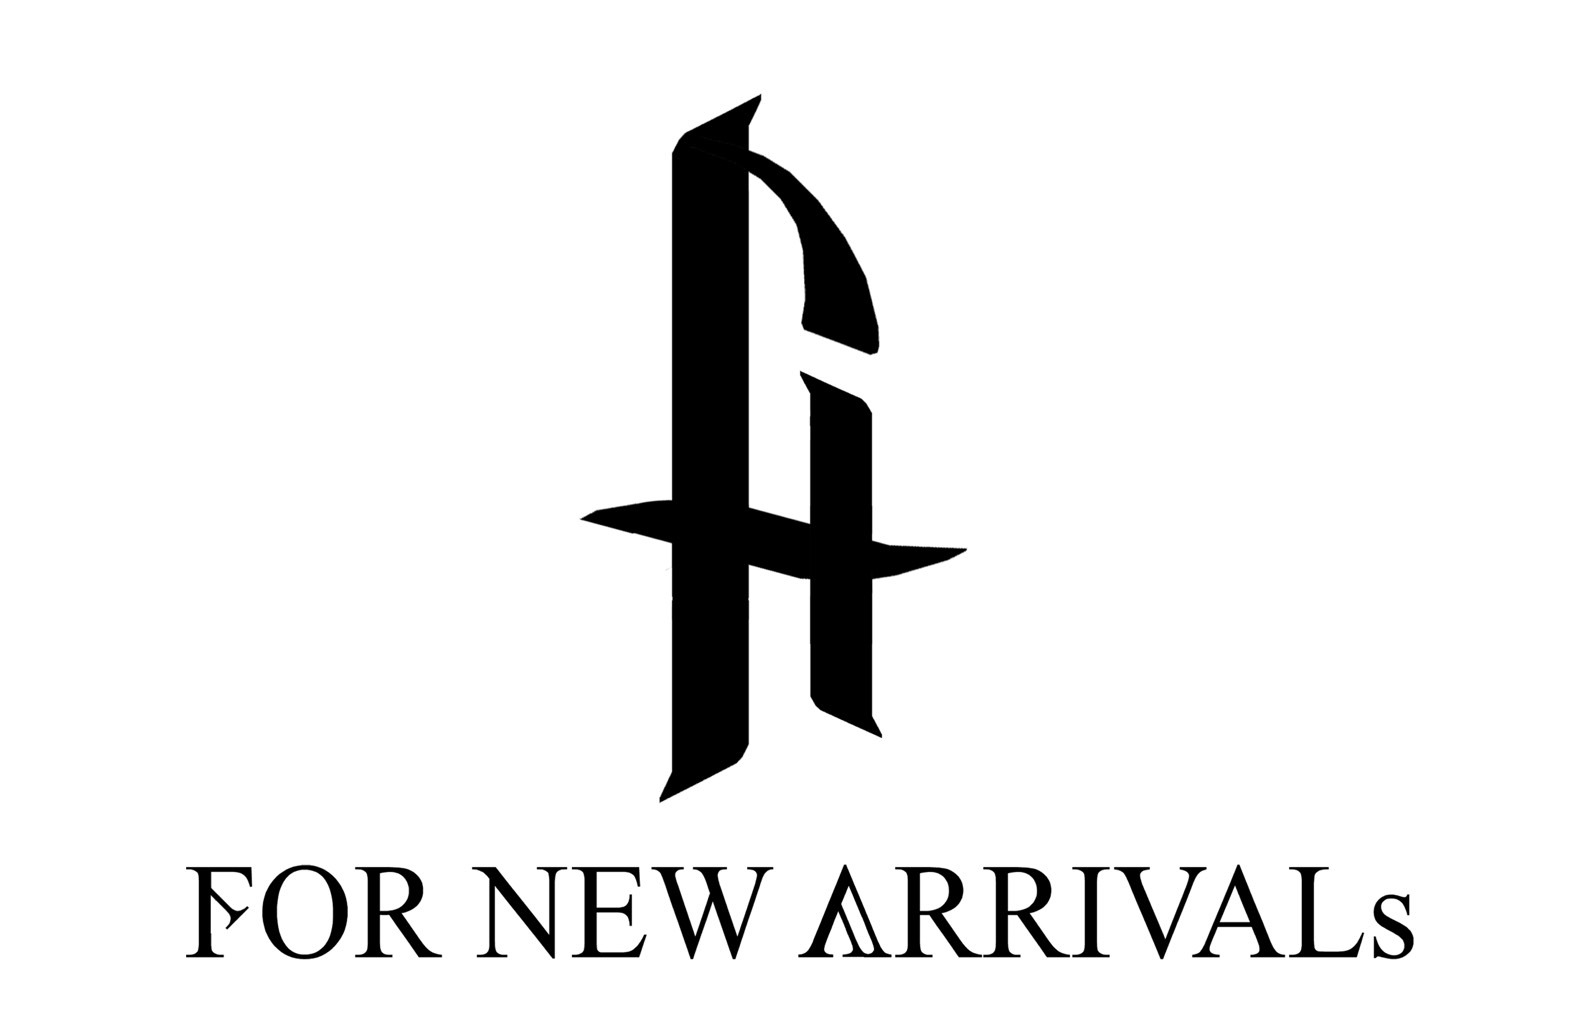 FOR NEW ARRIVALs